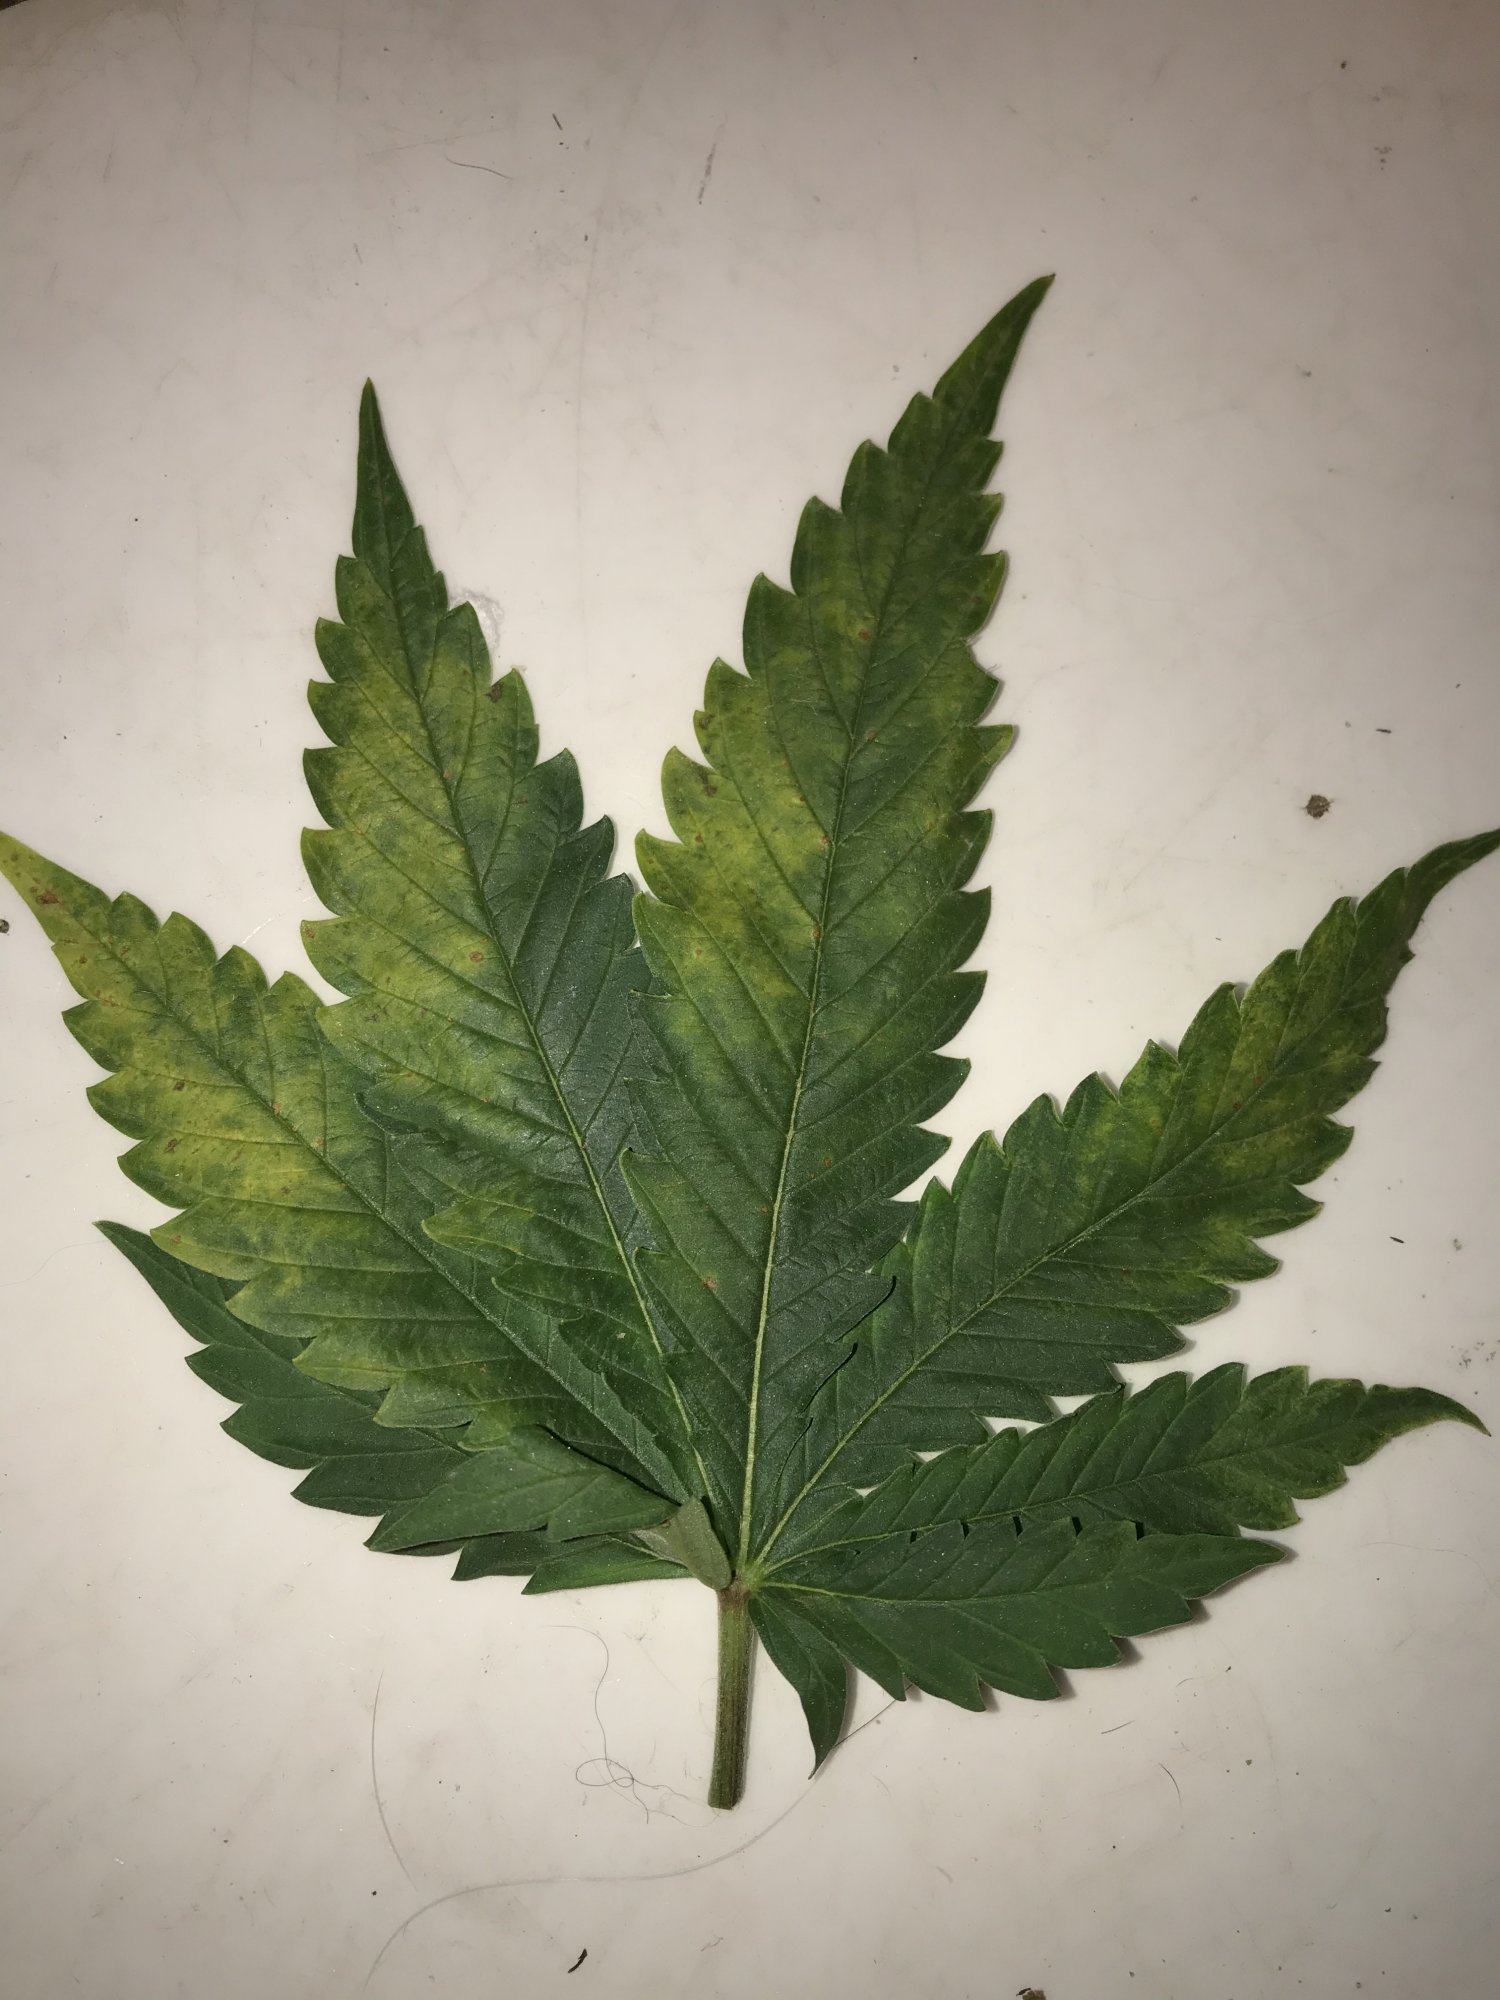 Need help identifying this deficiency